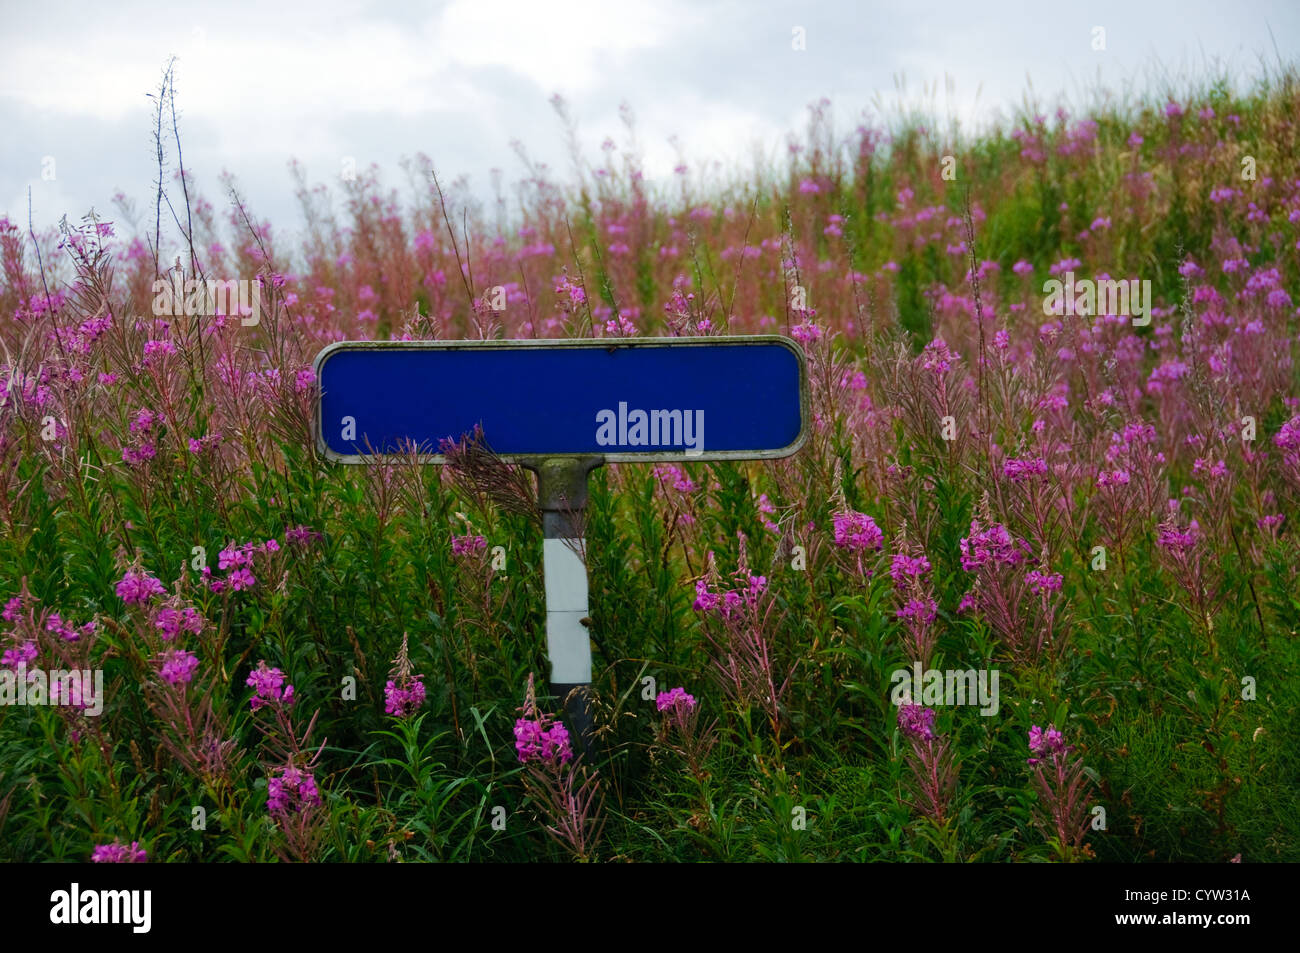 A blank street sign surrounded by pink flowers Stock Photo